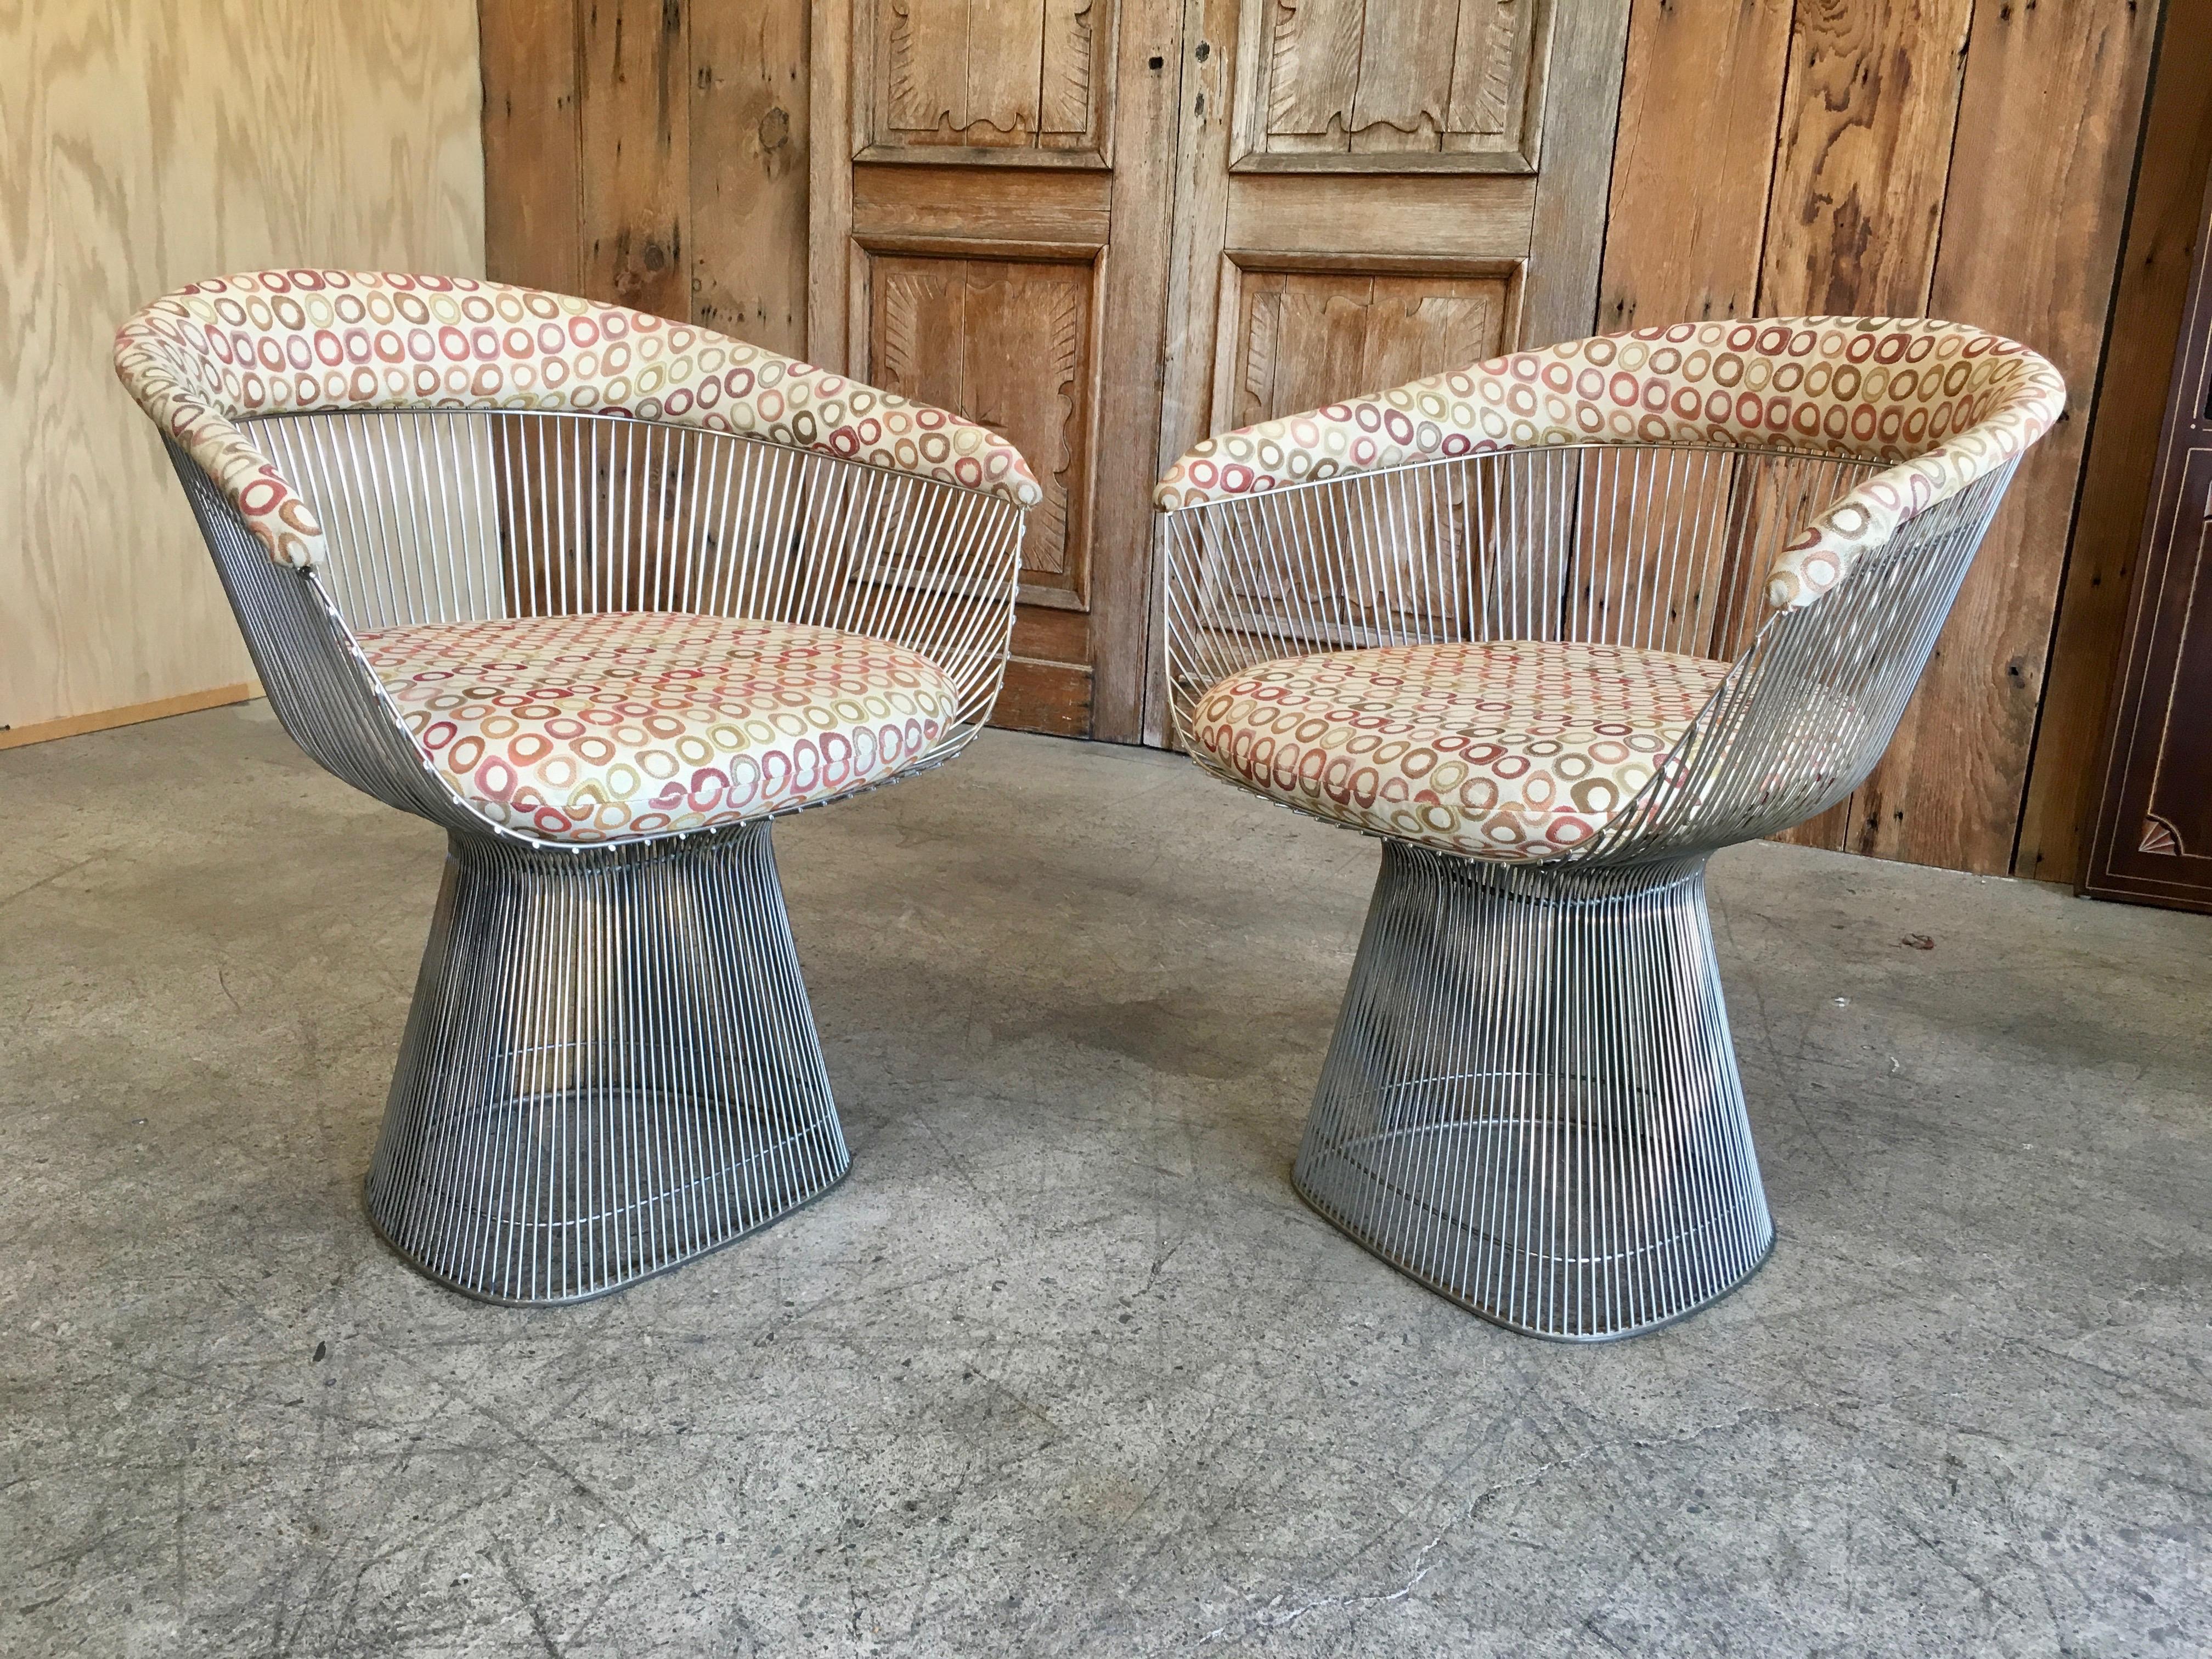 20th Century Set of Two Midcentury Chairs by Warren Platner for Knoll Chairs